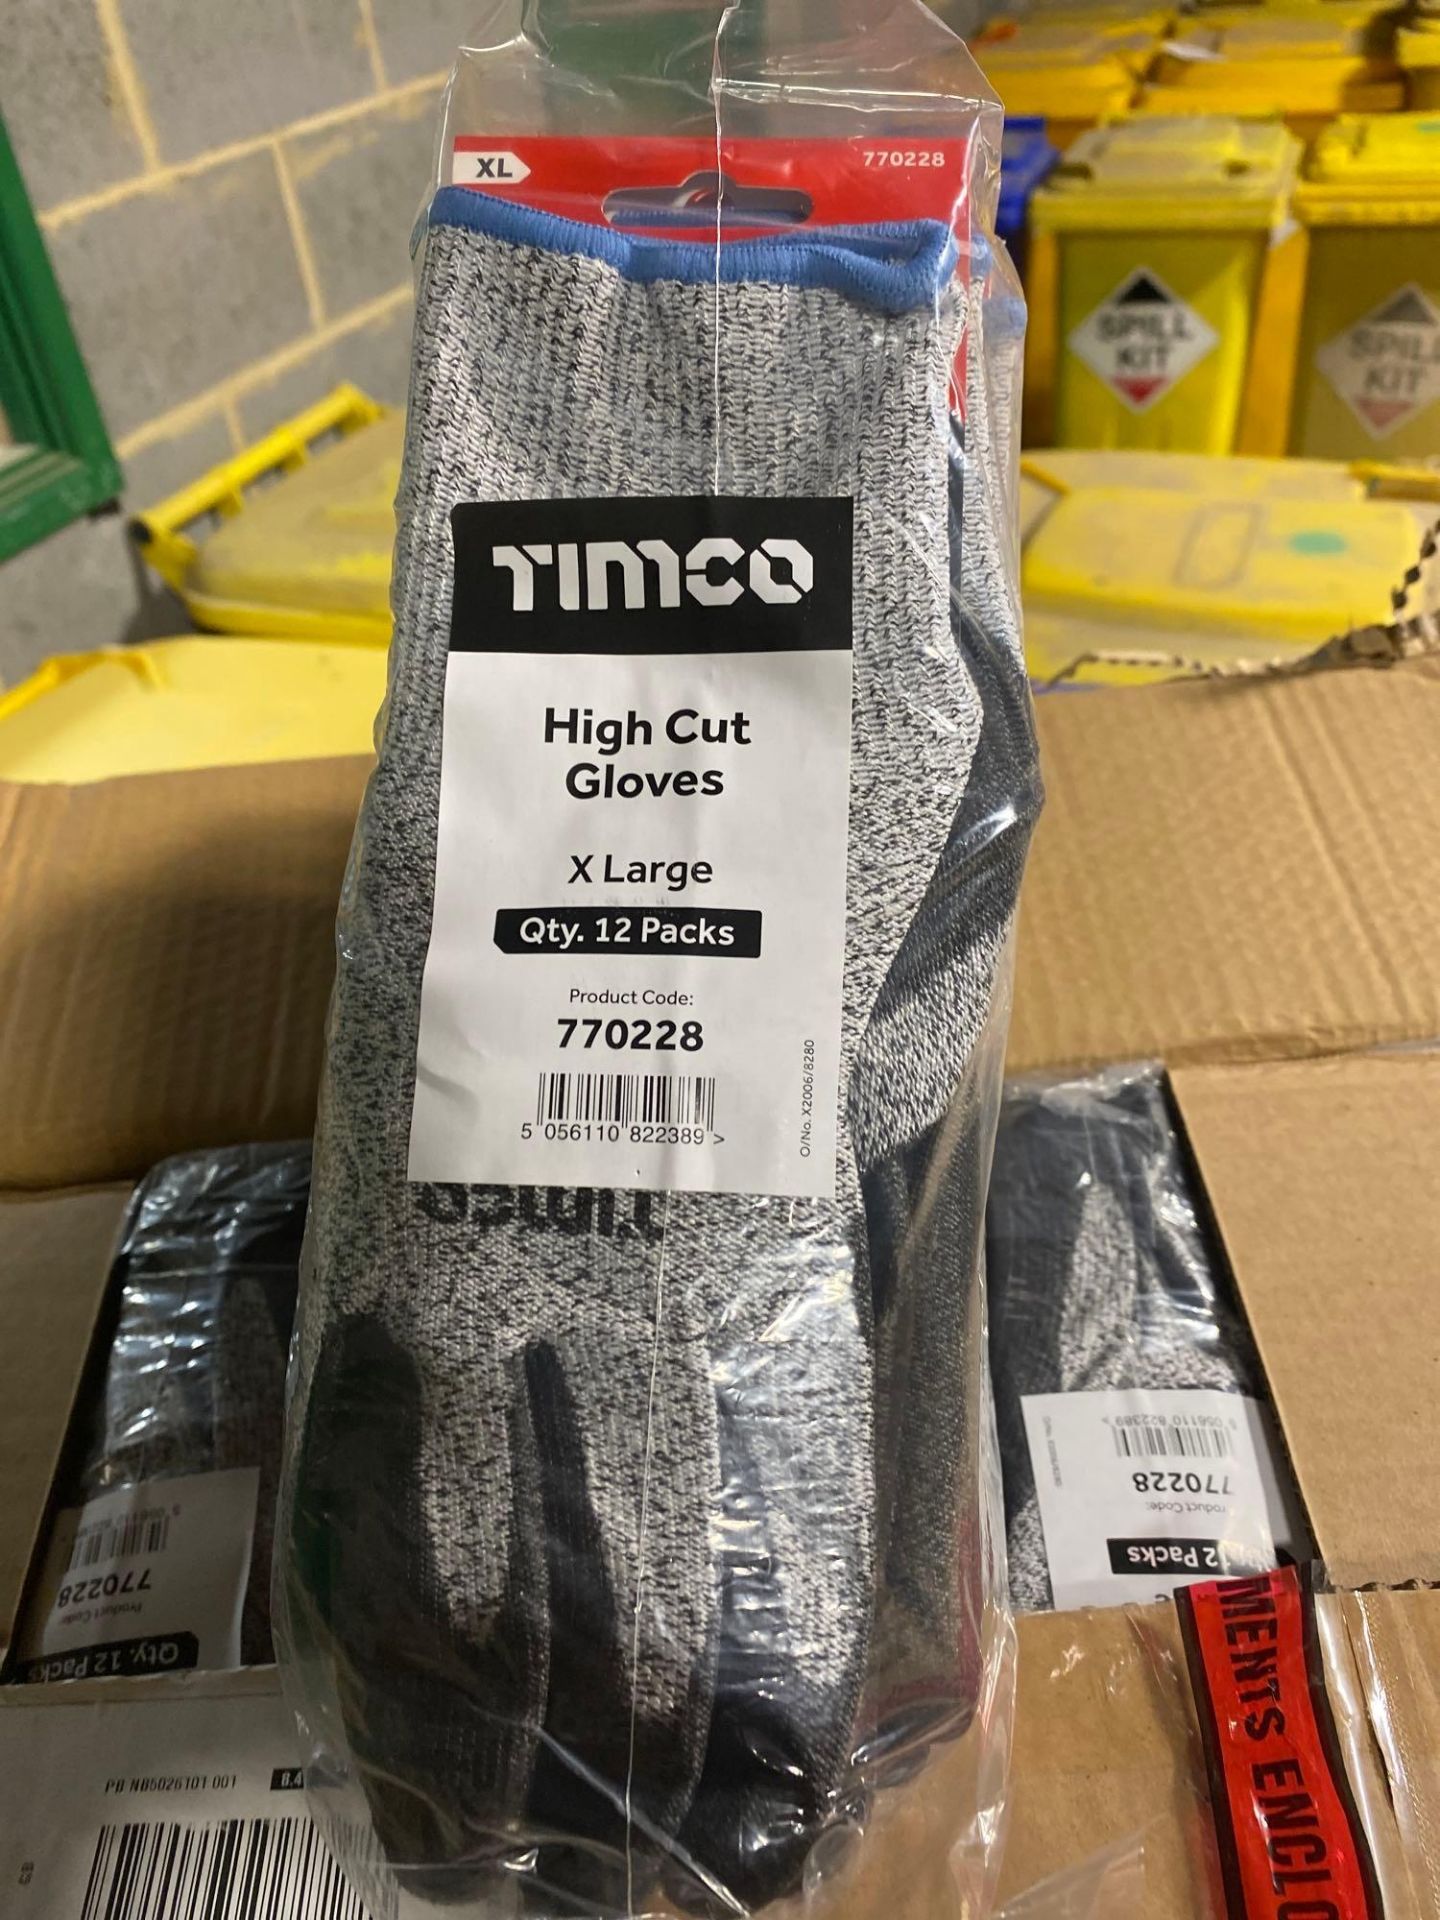 1 box of 120 pairs of extra large high cut gloves made by Timco